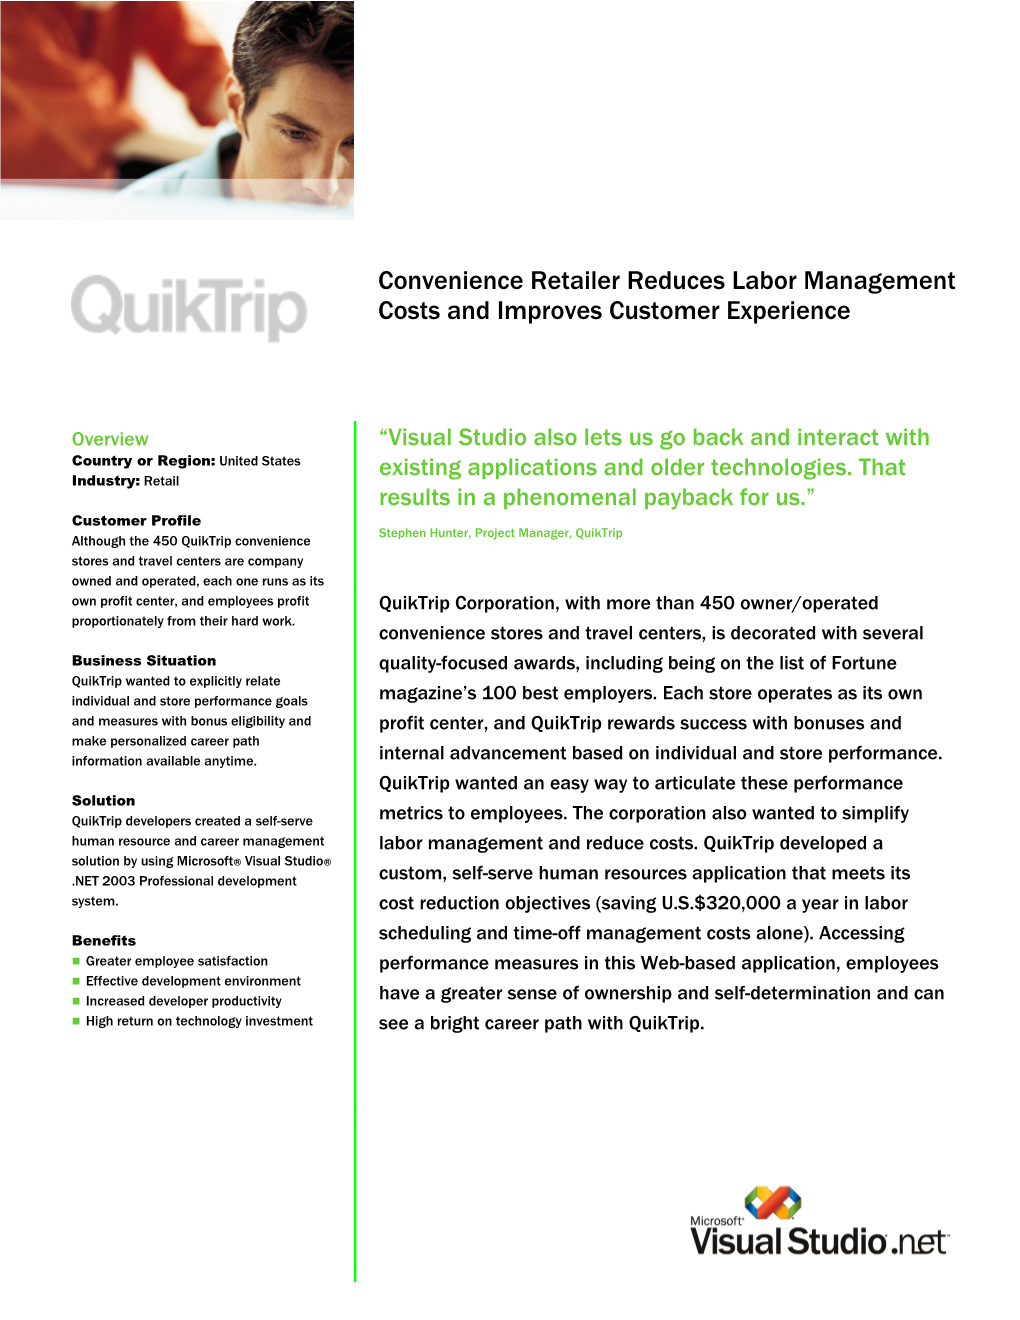 Convenience Retailer Reduces Labor Management Costs and Improves Customer Experience